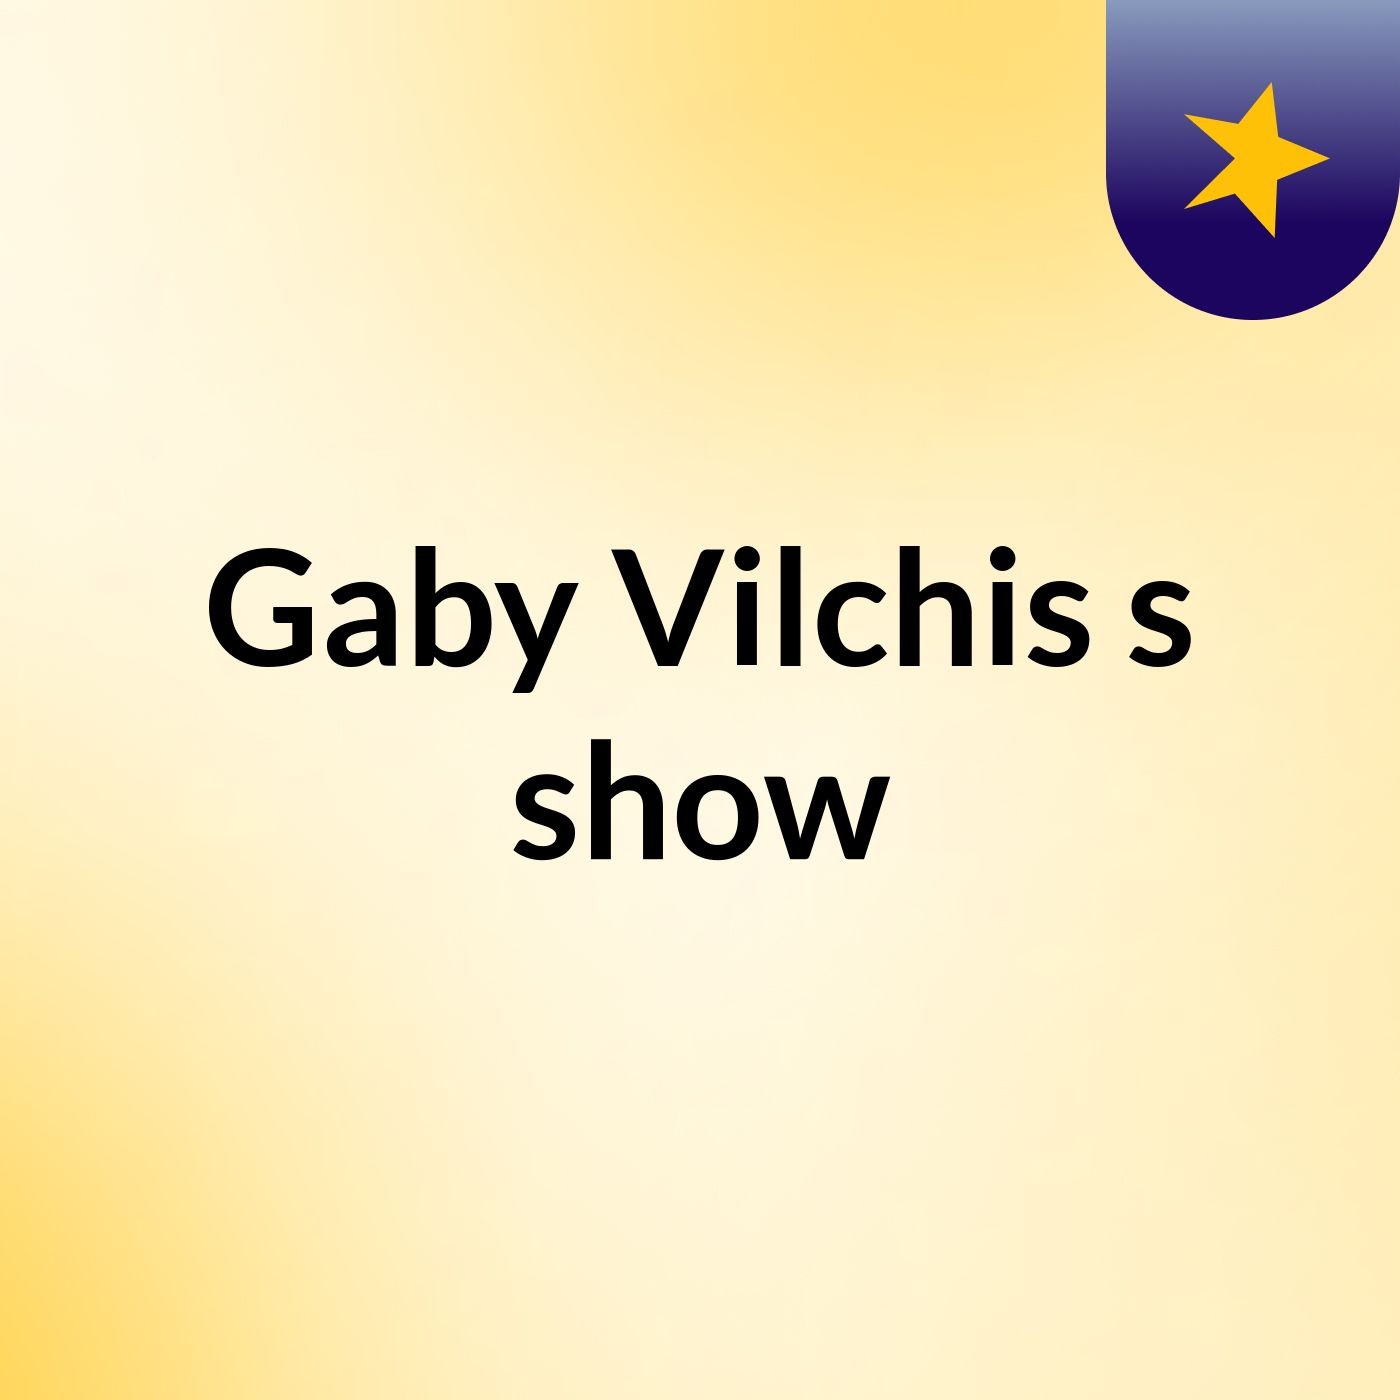 Gaby Vilchis's show